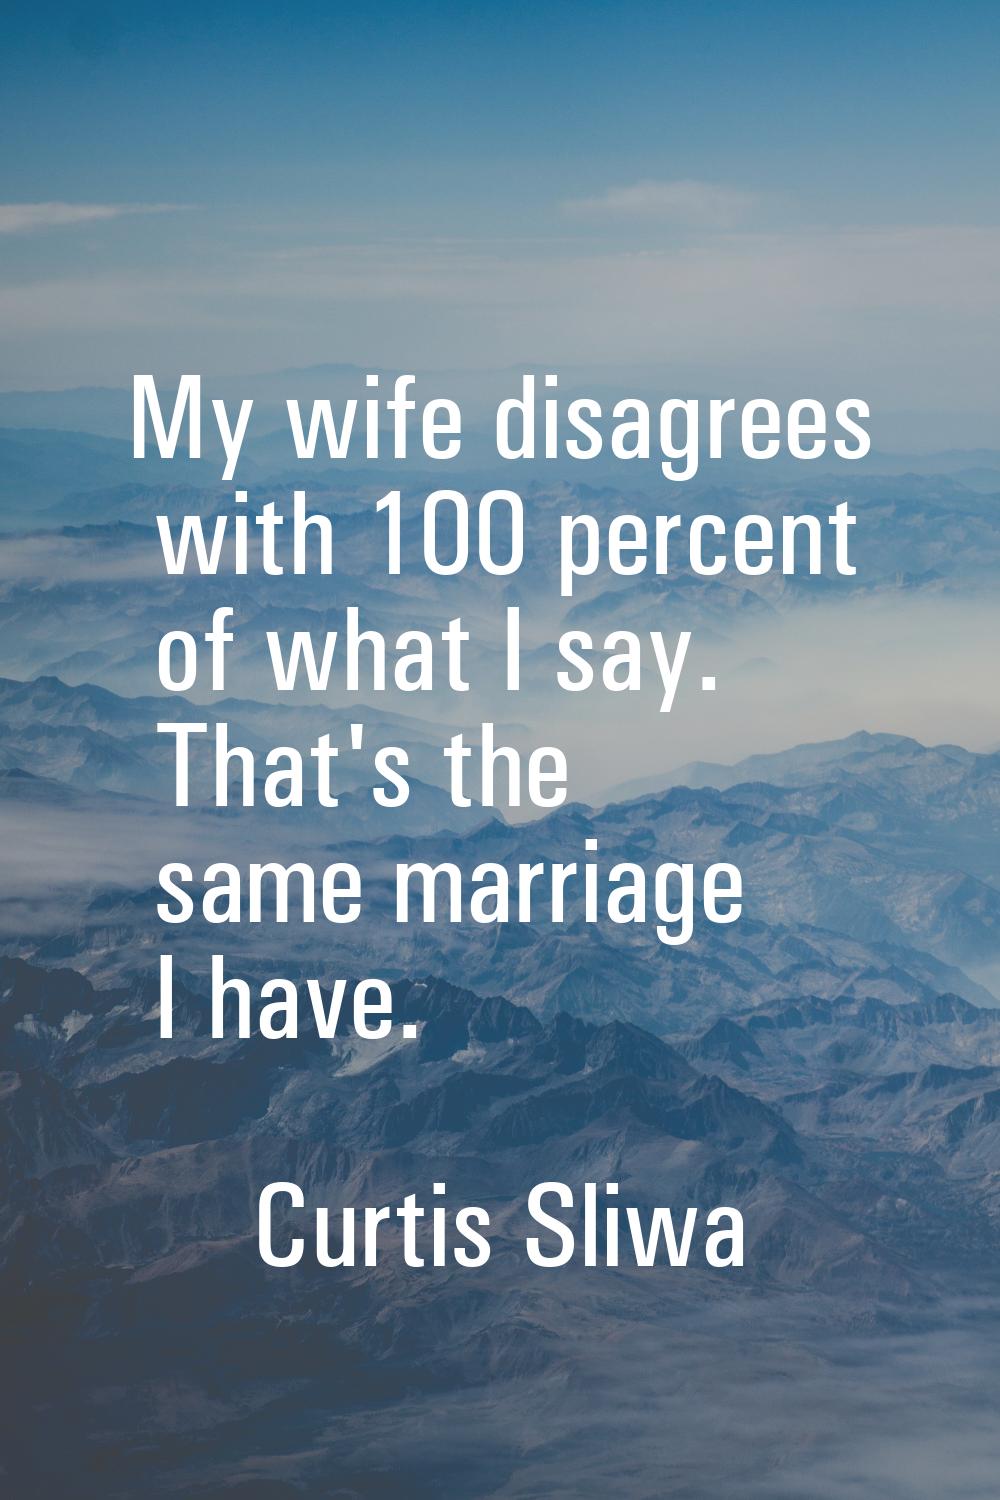 My wife disagrees with 100 percent of what I say. That's the same marriage I have.